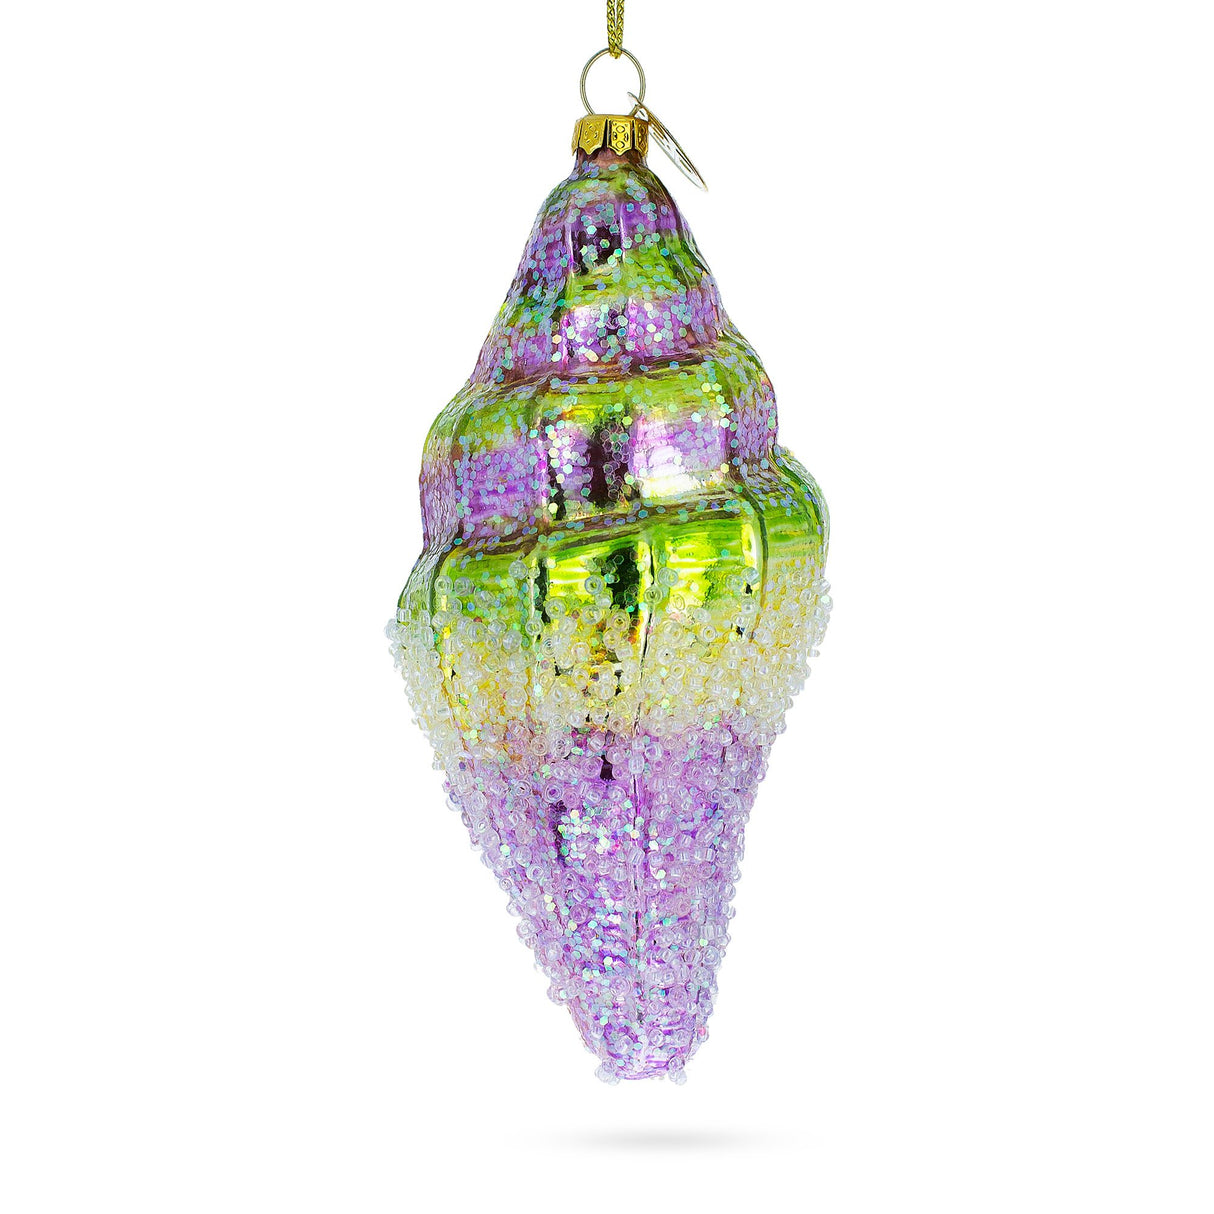 Glass Radiant Sea Snail with Colorful Beads - Blown Glass Christmas Ornament in Multi color